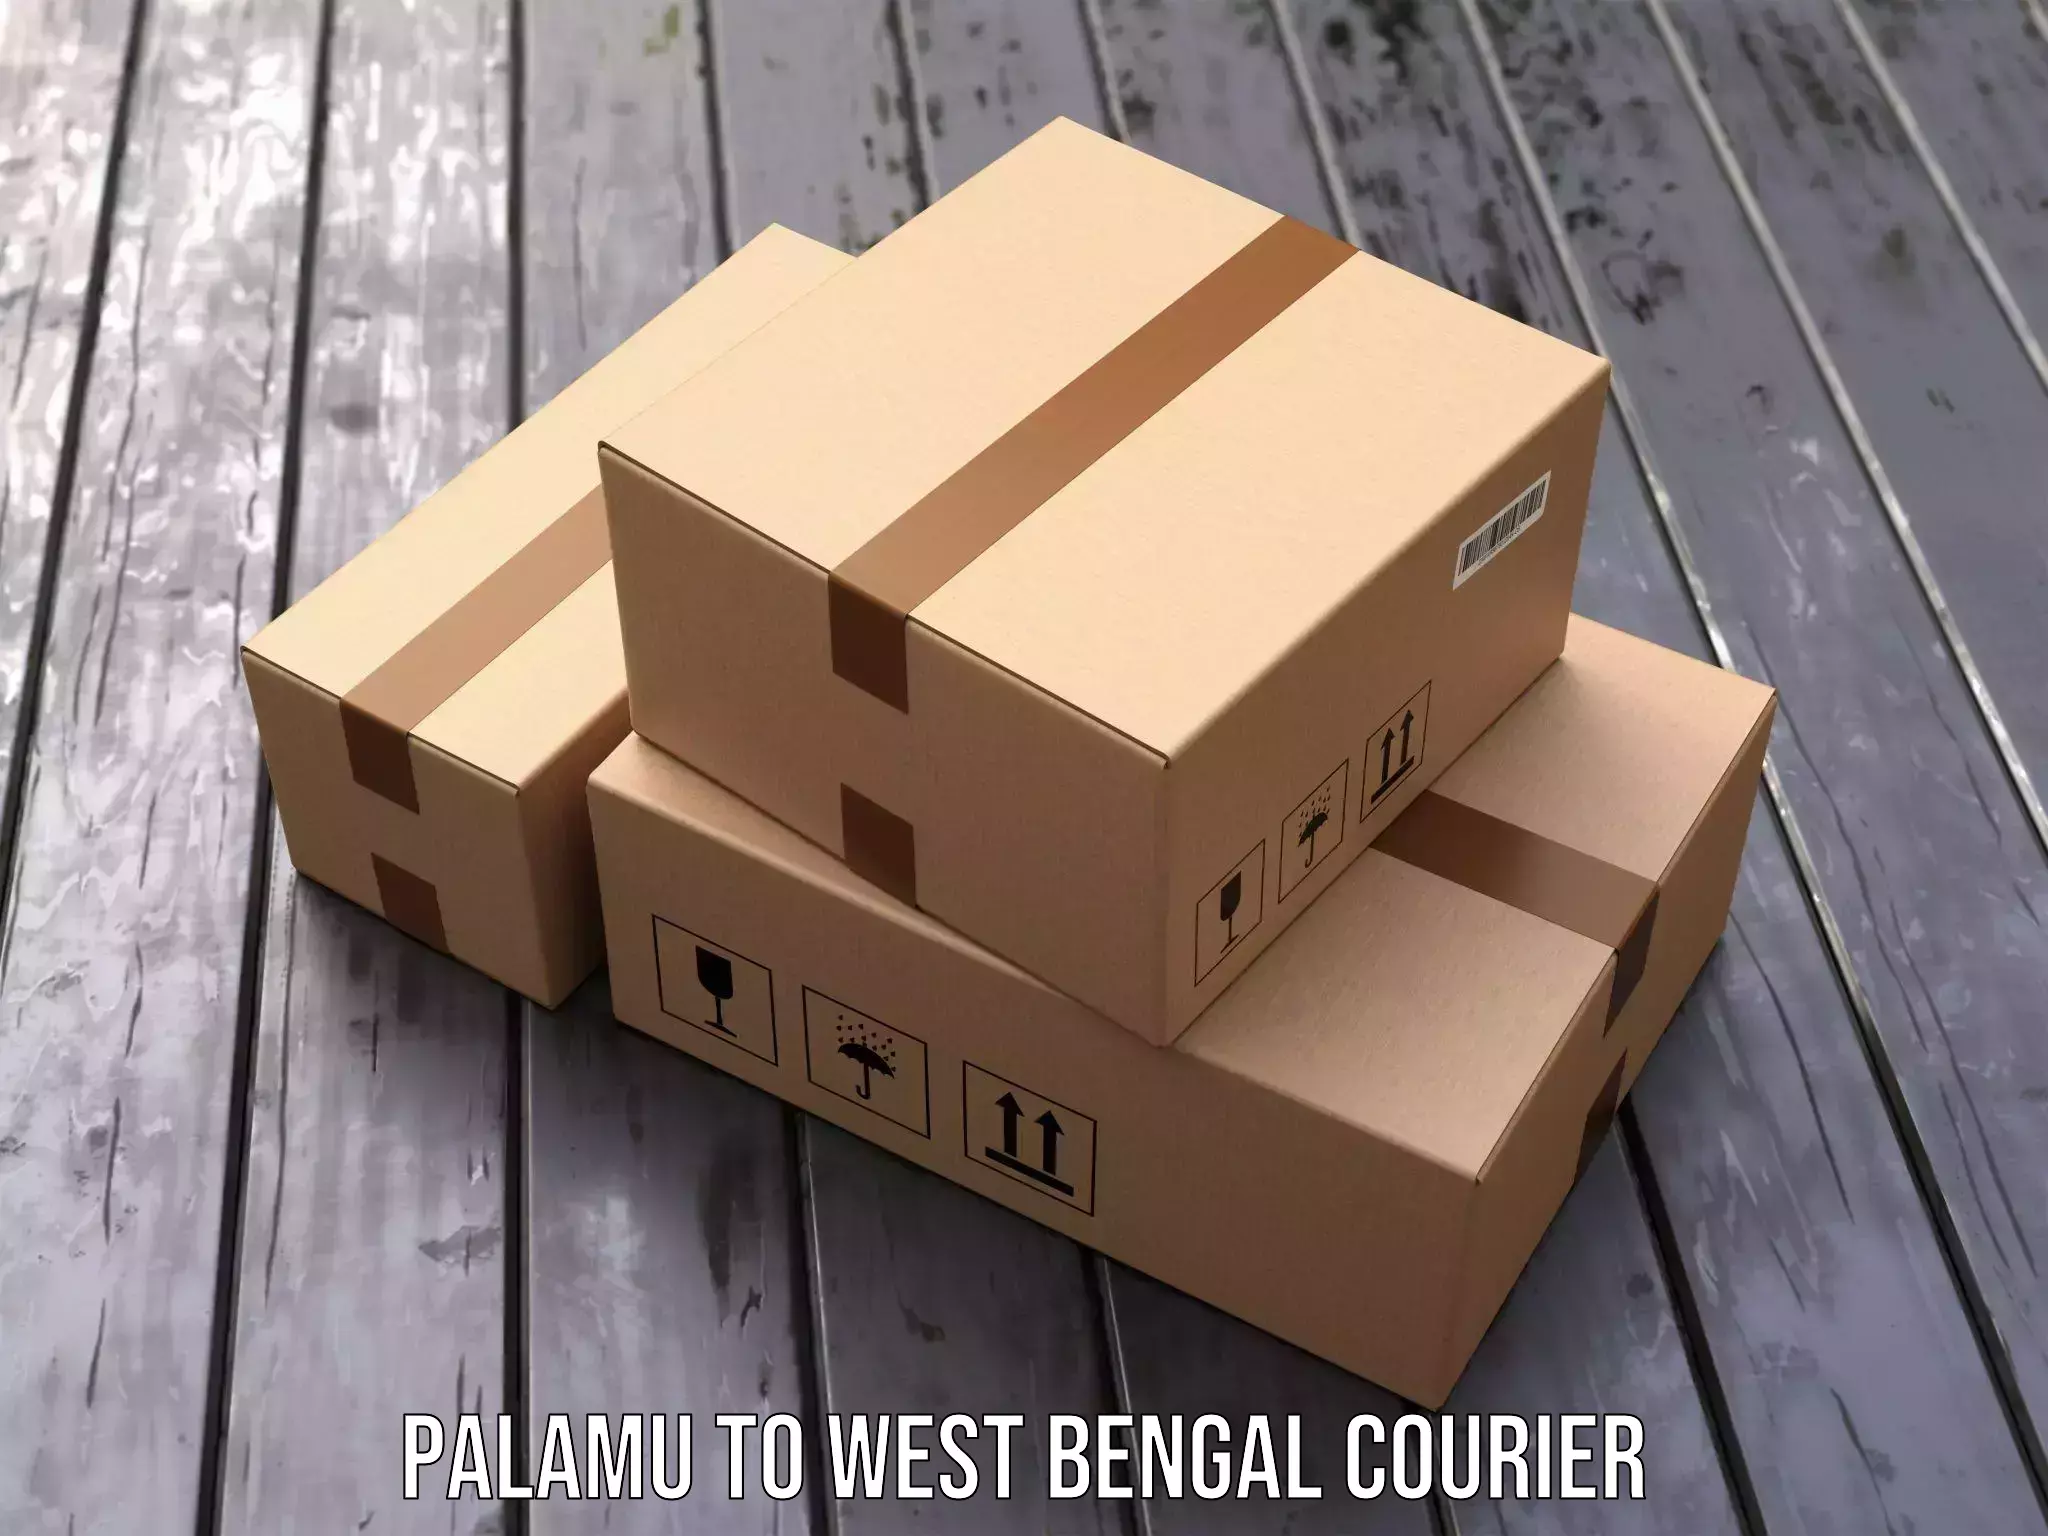 Courier service innovation Palamu to West Bengal